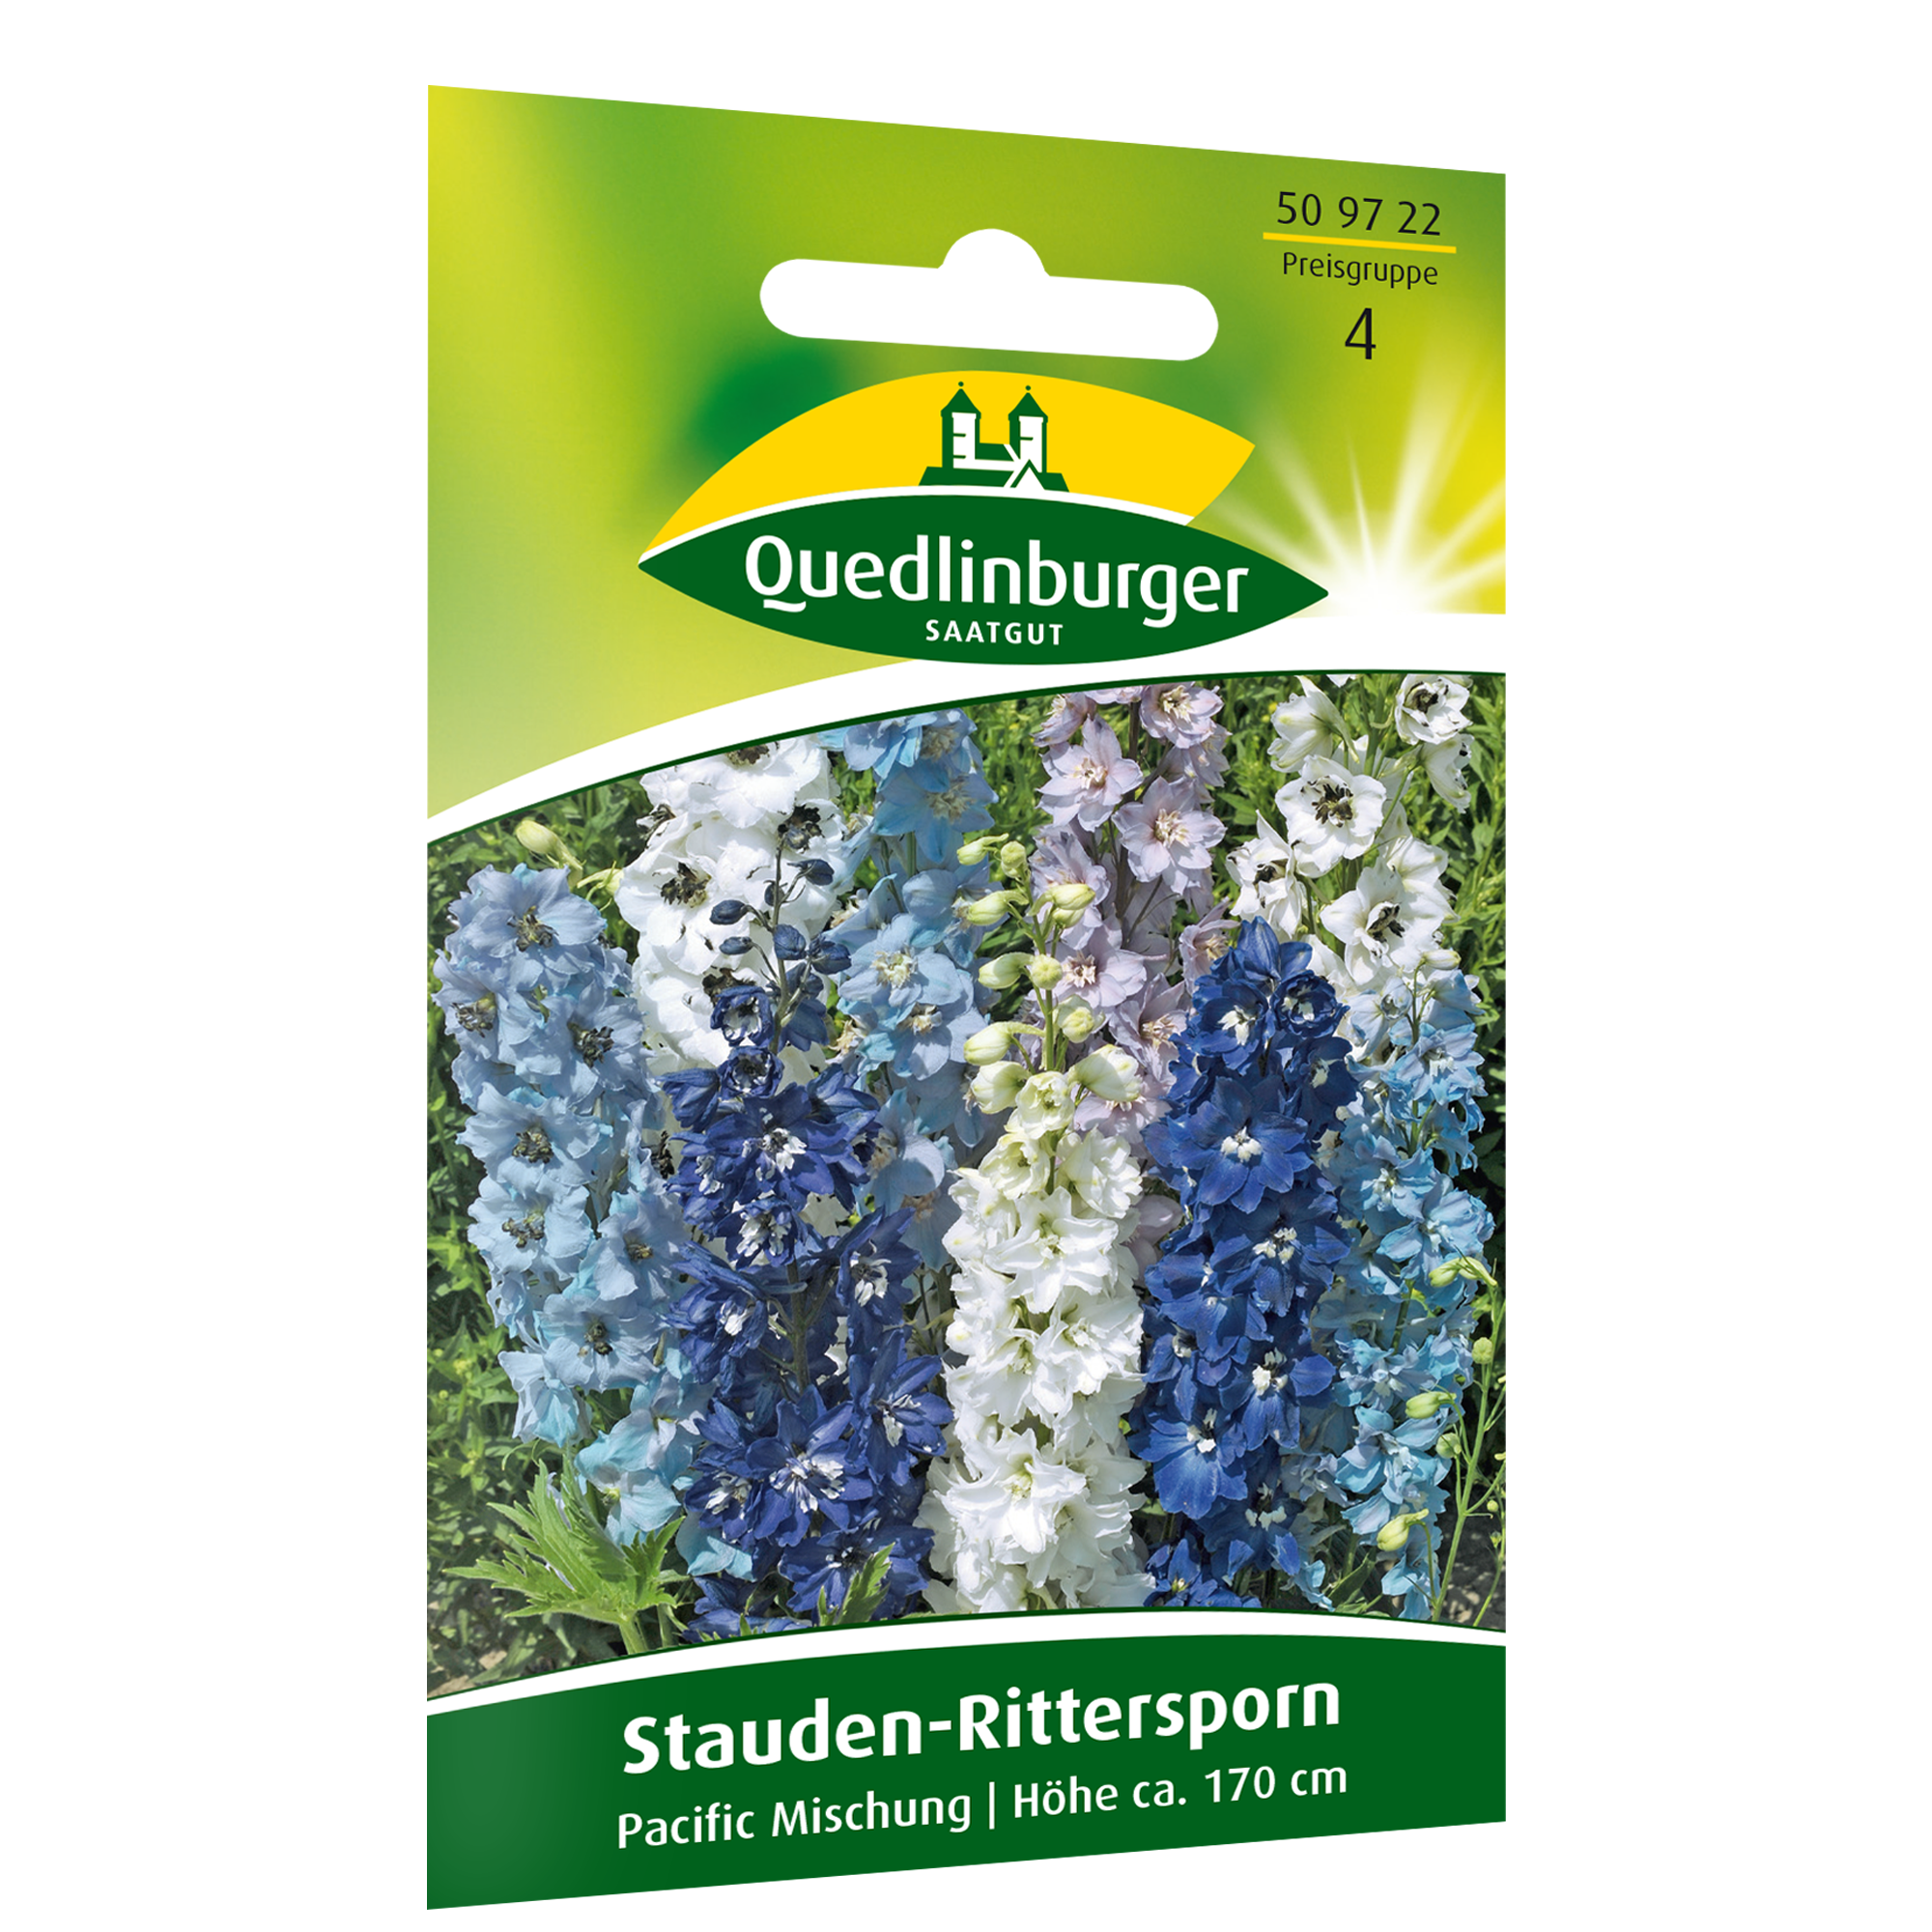 Staudenrittersporn 'Pacific' Mischung + product picture